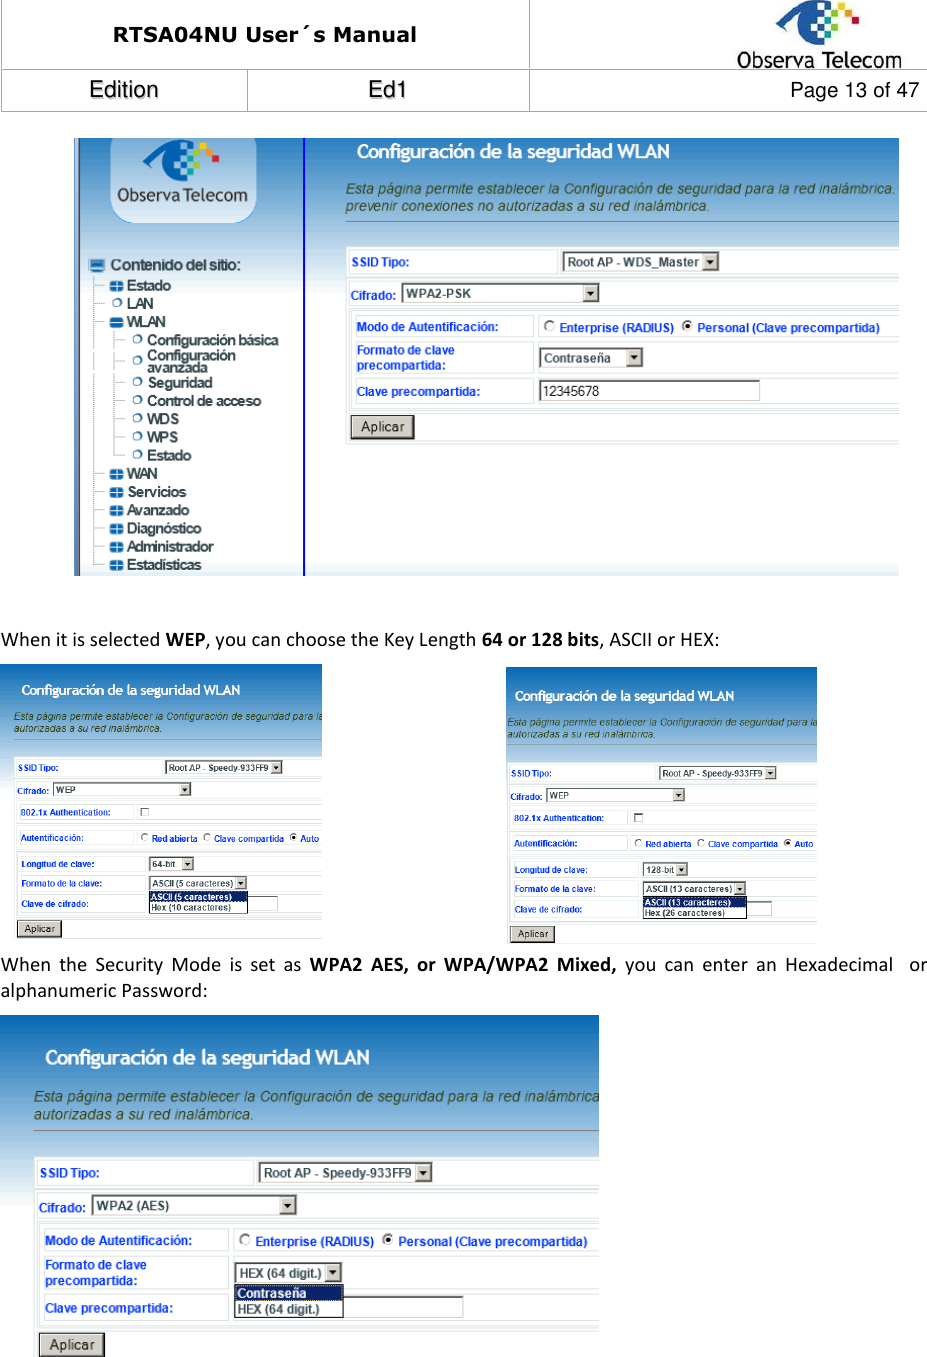 RTSA04NU User´s Manual  EEddiittiioonn  EEdd11  Page 13 of 47    When it is selected WEP, you can choose the Key Length 64 or 128 bits, ASCII or HEX:  When  the  Security  Mode  is  set  as  WPA2  AES,  or  WPA/WPA2  Mixed,  you  can  enter  an  Hexadecimal    or alphanumeric Password:    